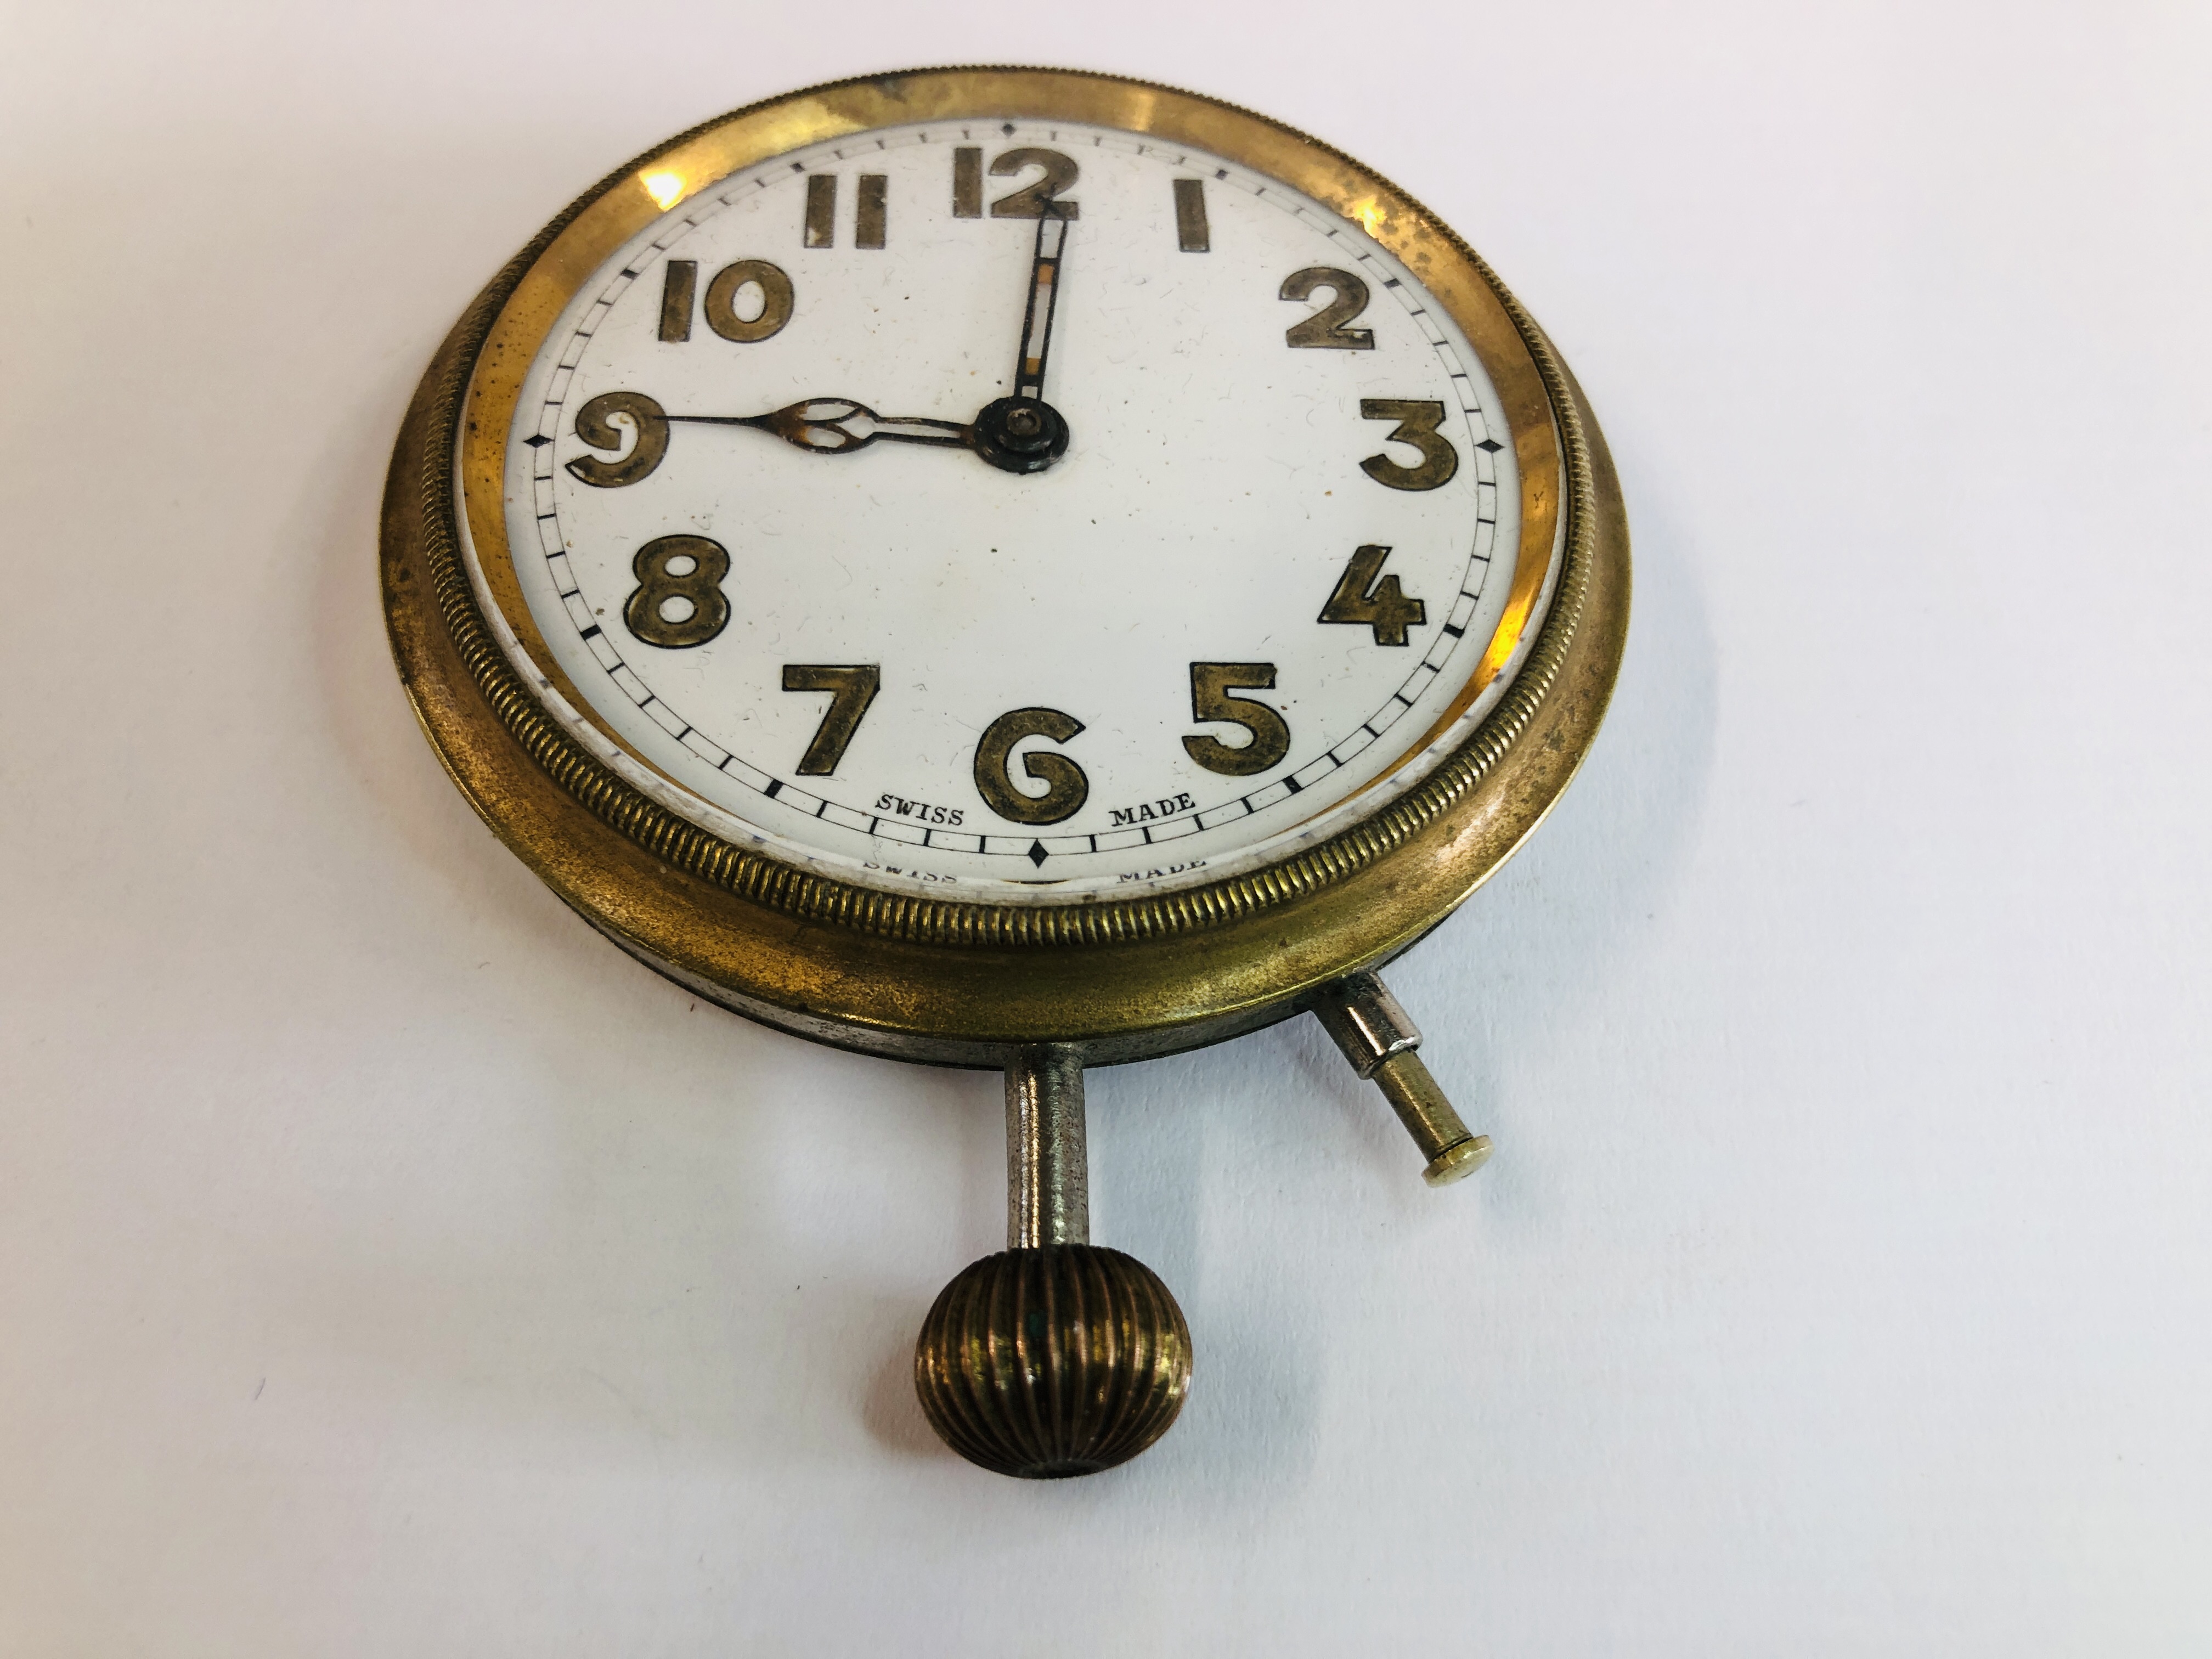 A VINTAGE SWISS MADE POCKET WATCH WITH ENAMEL DIAL. - Image 3 of 6